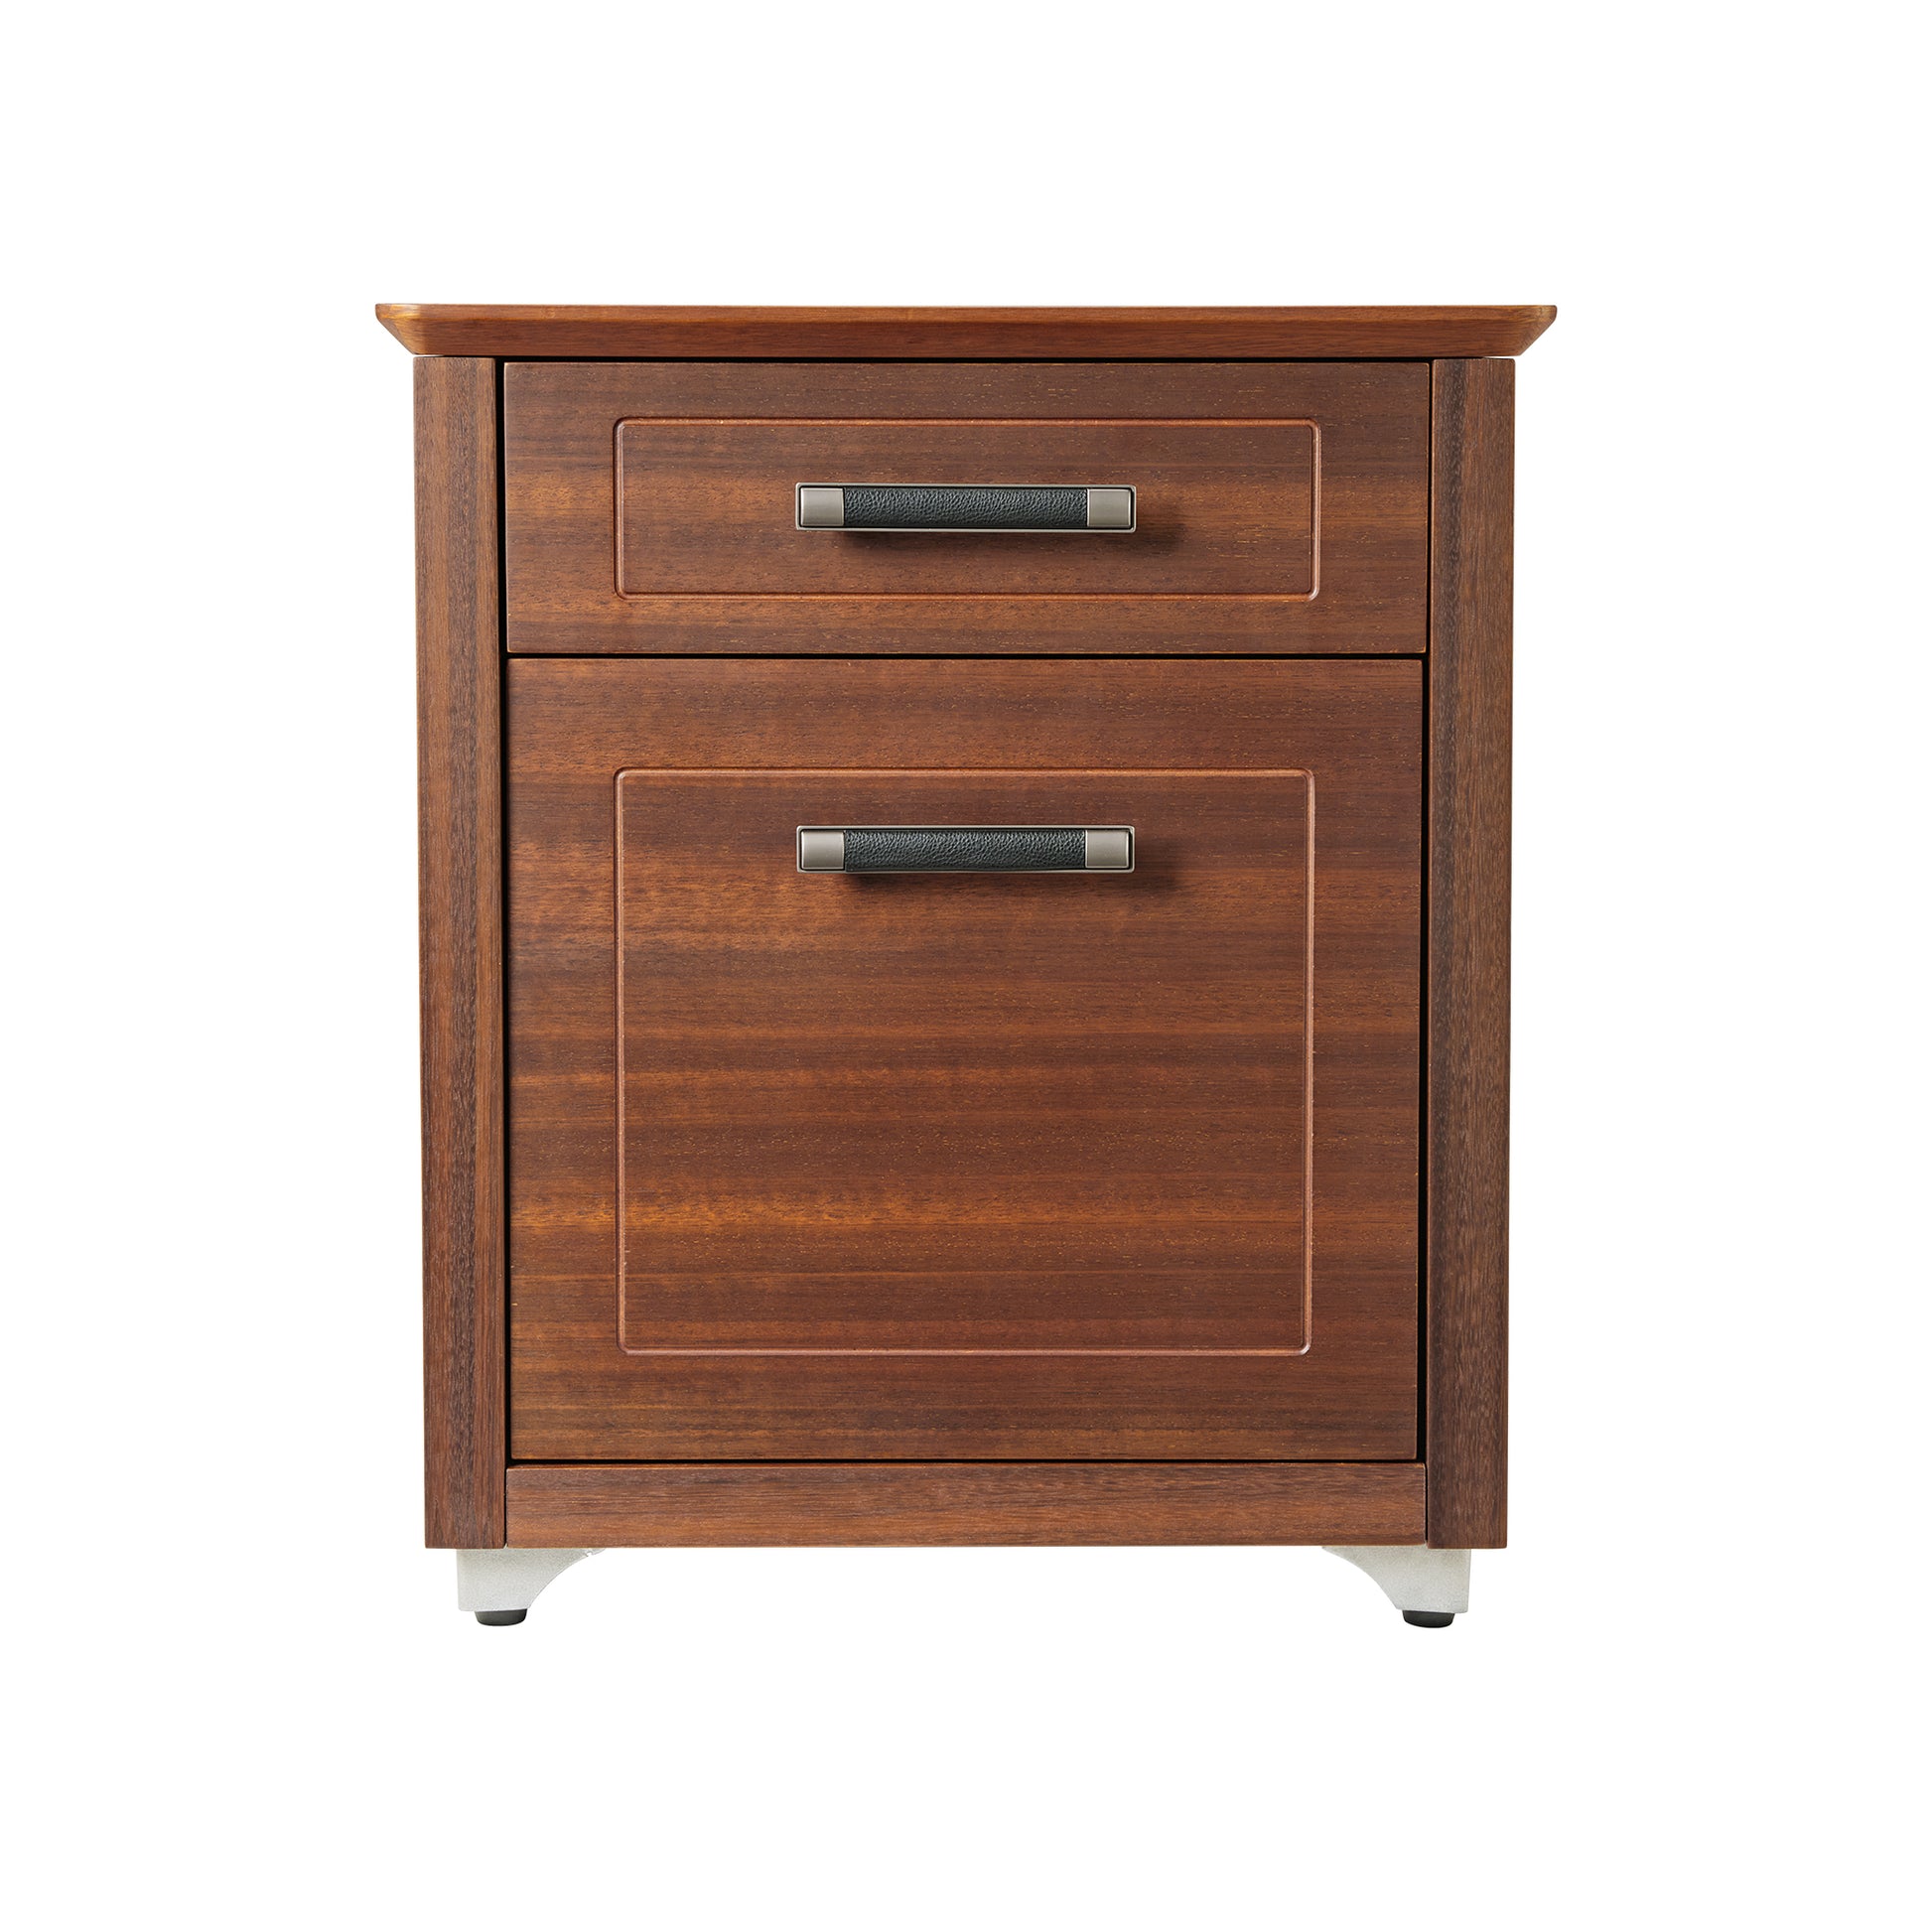 Executive Ark 19 inch closed file storage cabinet with walnut finish and sturdy  metal legs